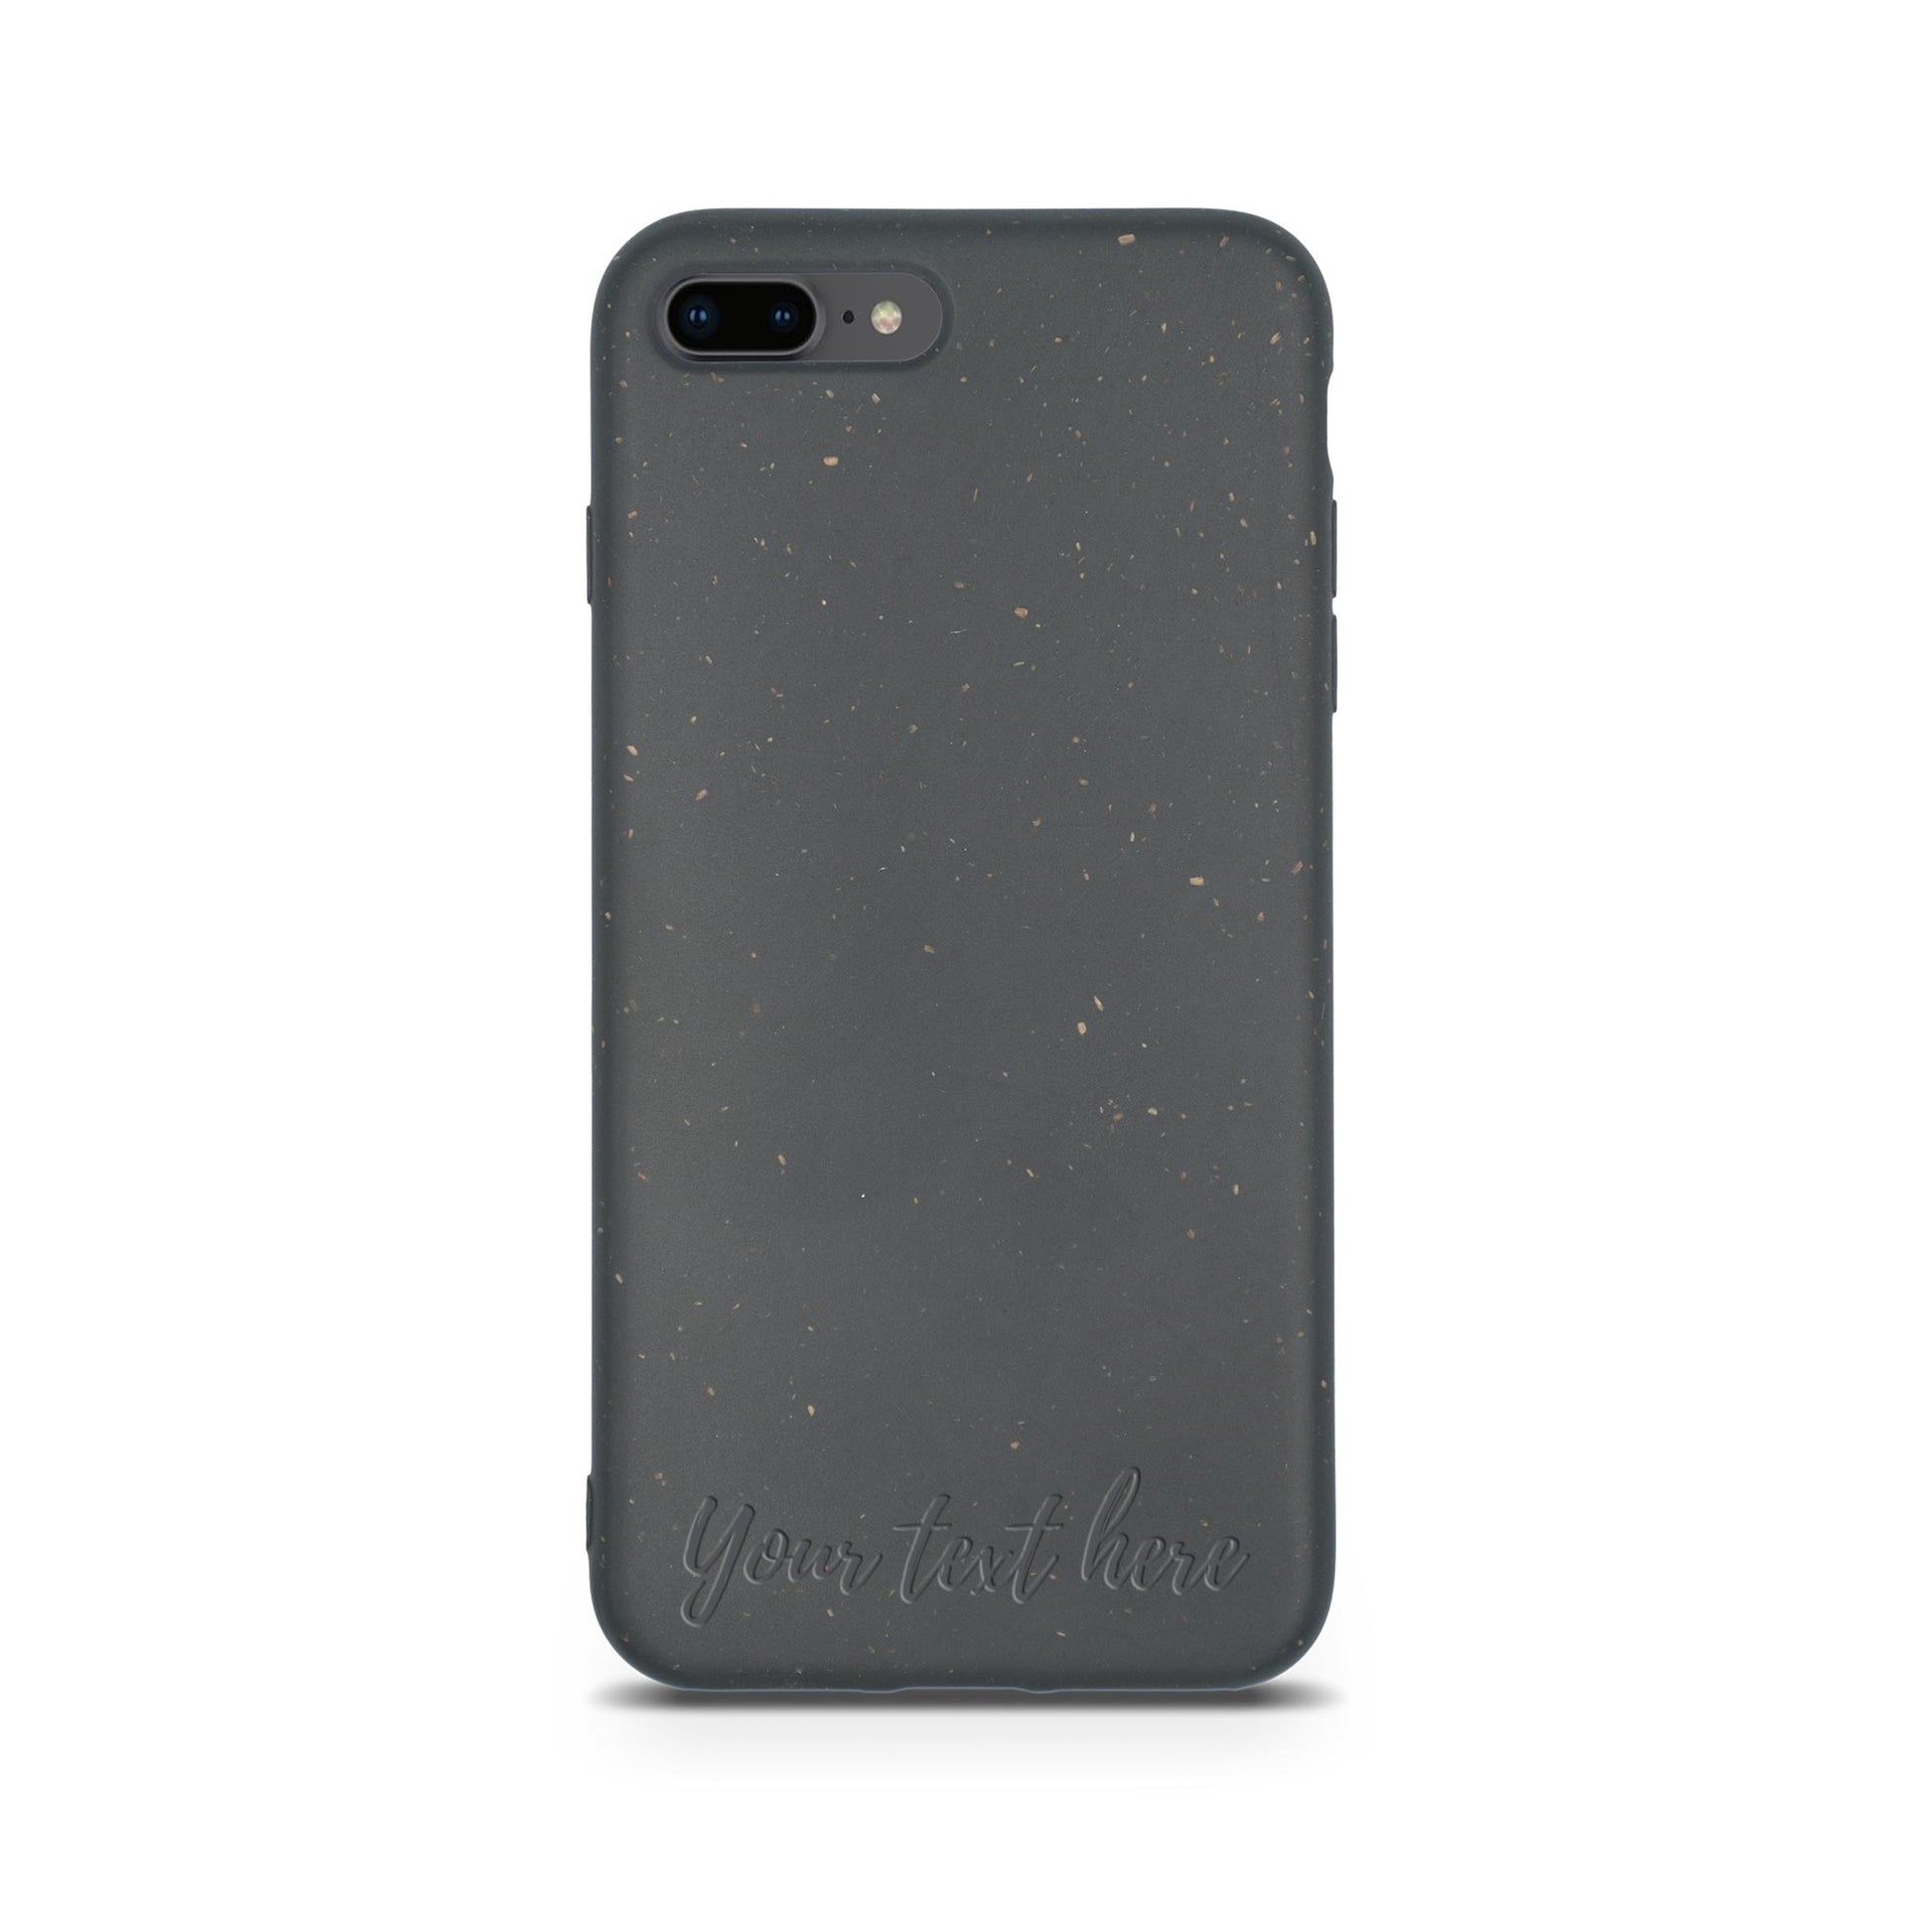 An eco-friendly Biodegradable Personalized Iphone Case in Black with customizable text area displayed on a white background by Tan Lily.